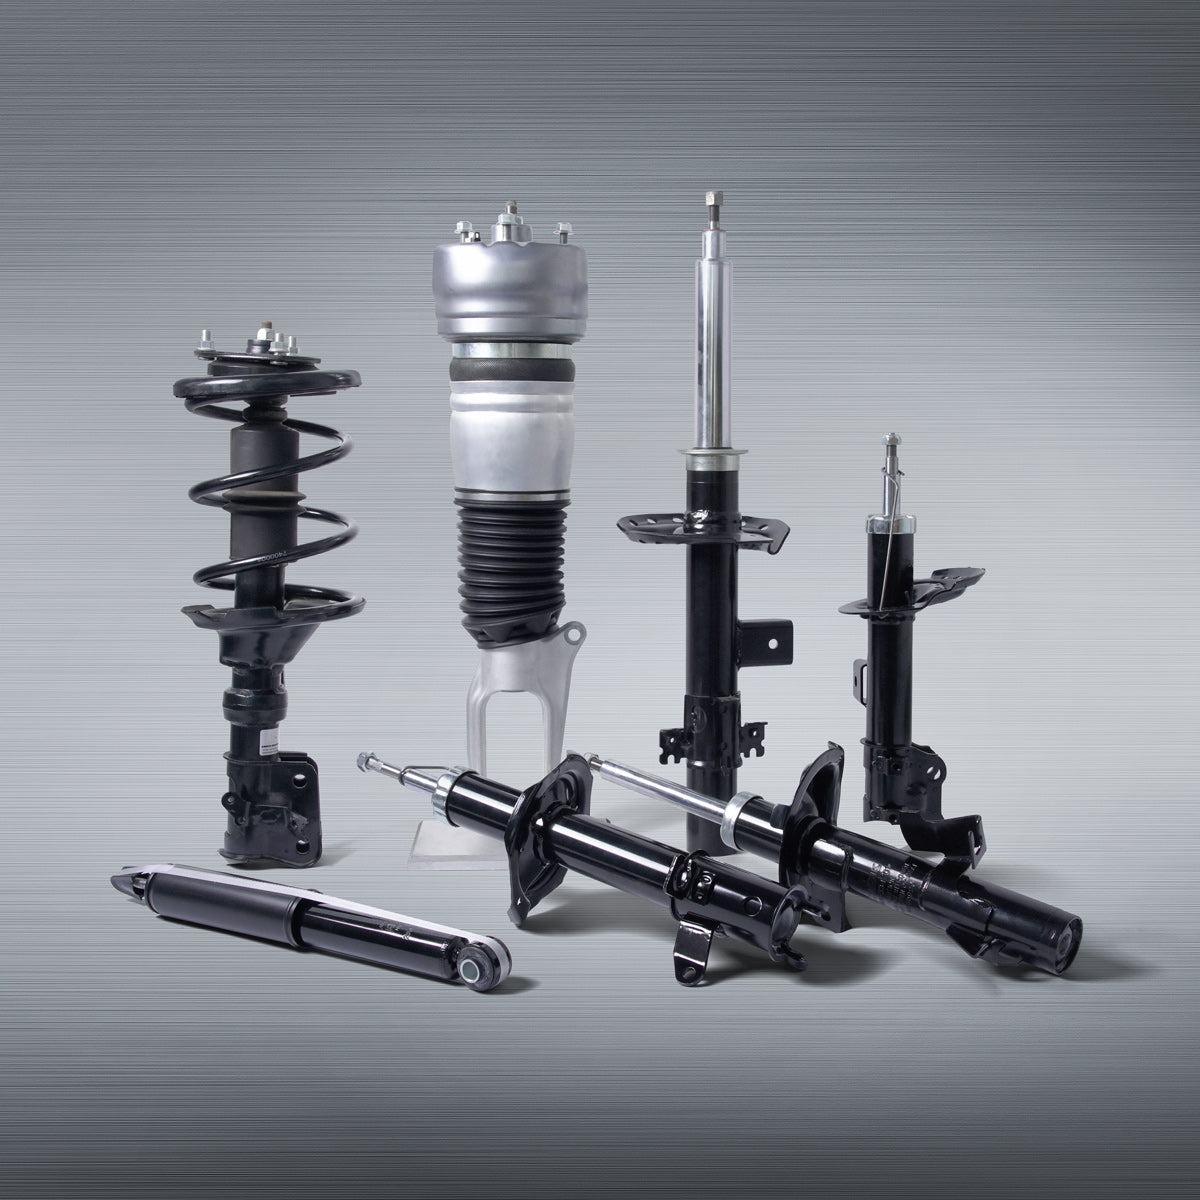 [SHOCK ABSORBER] - [loosoo auto parts] The Loosoo car shock absorber replacement has a more flexible valve system design than the original shock absorber and produces low wear and long life in strict accordance with OEM standards, making the car safer, more comfortable, and more controllable, to offer a stable, and noiseless ride.